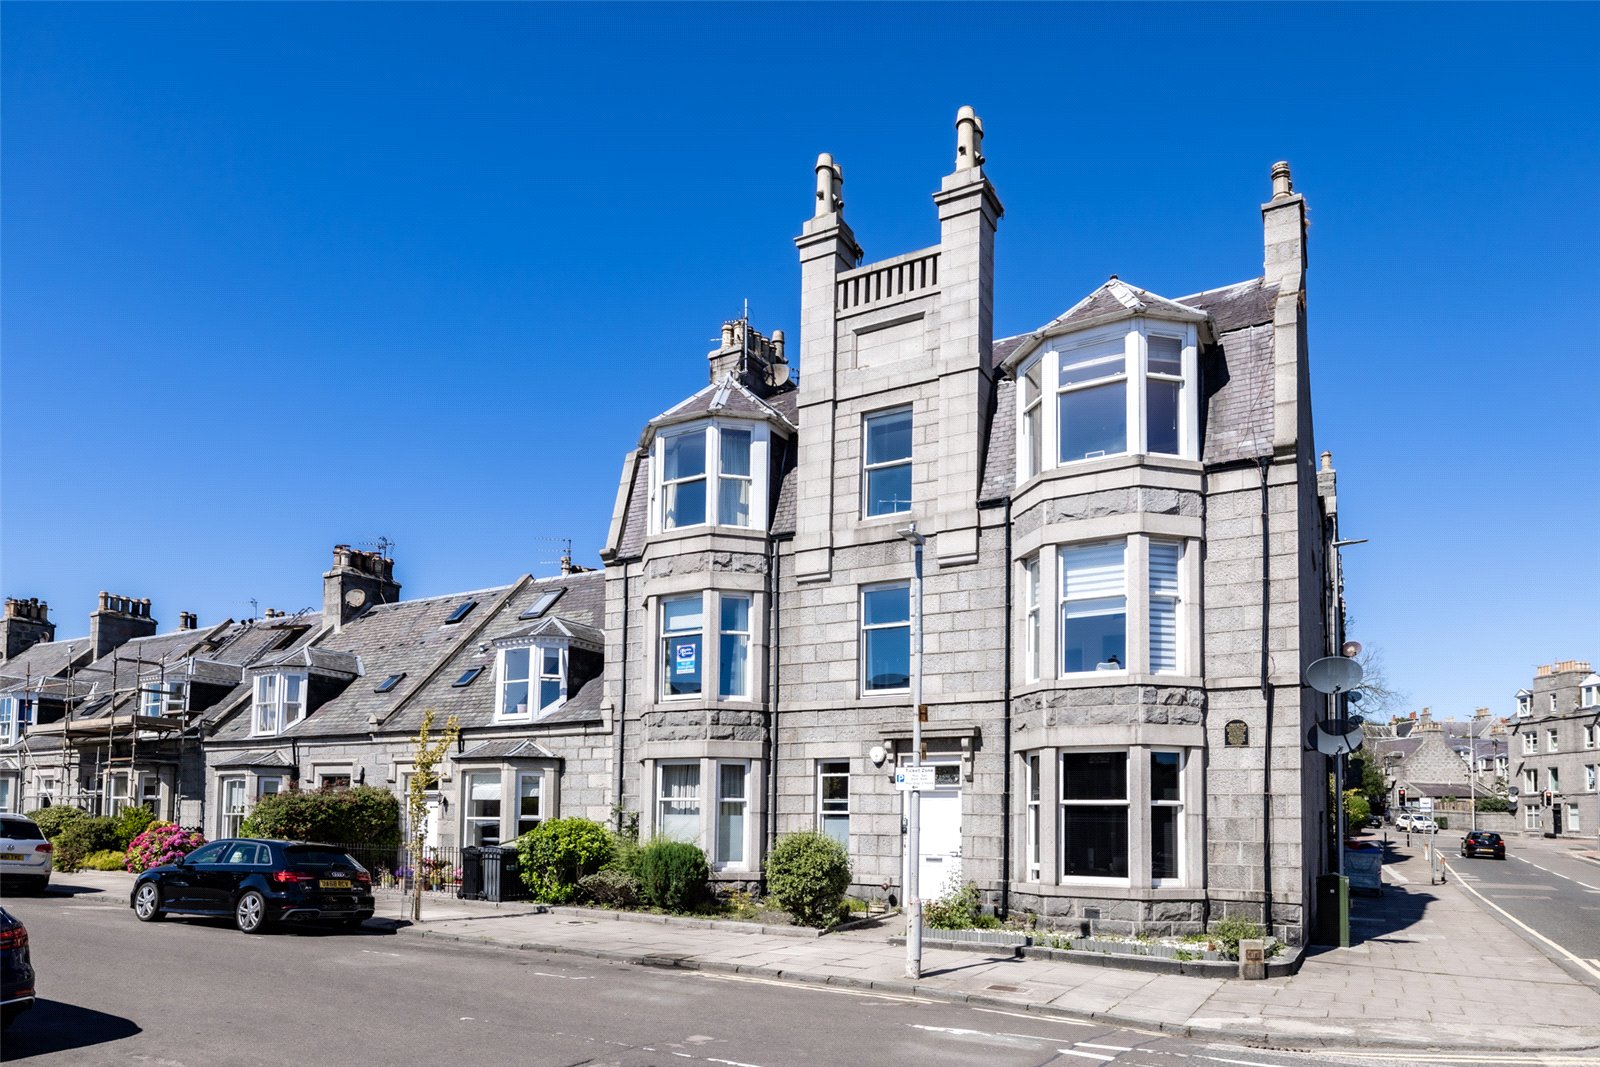 Our latest properties for sale or to let (15th August 2022)